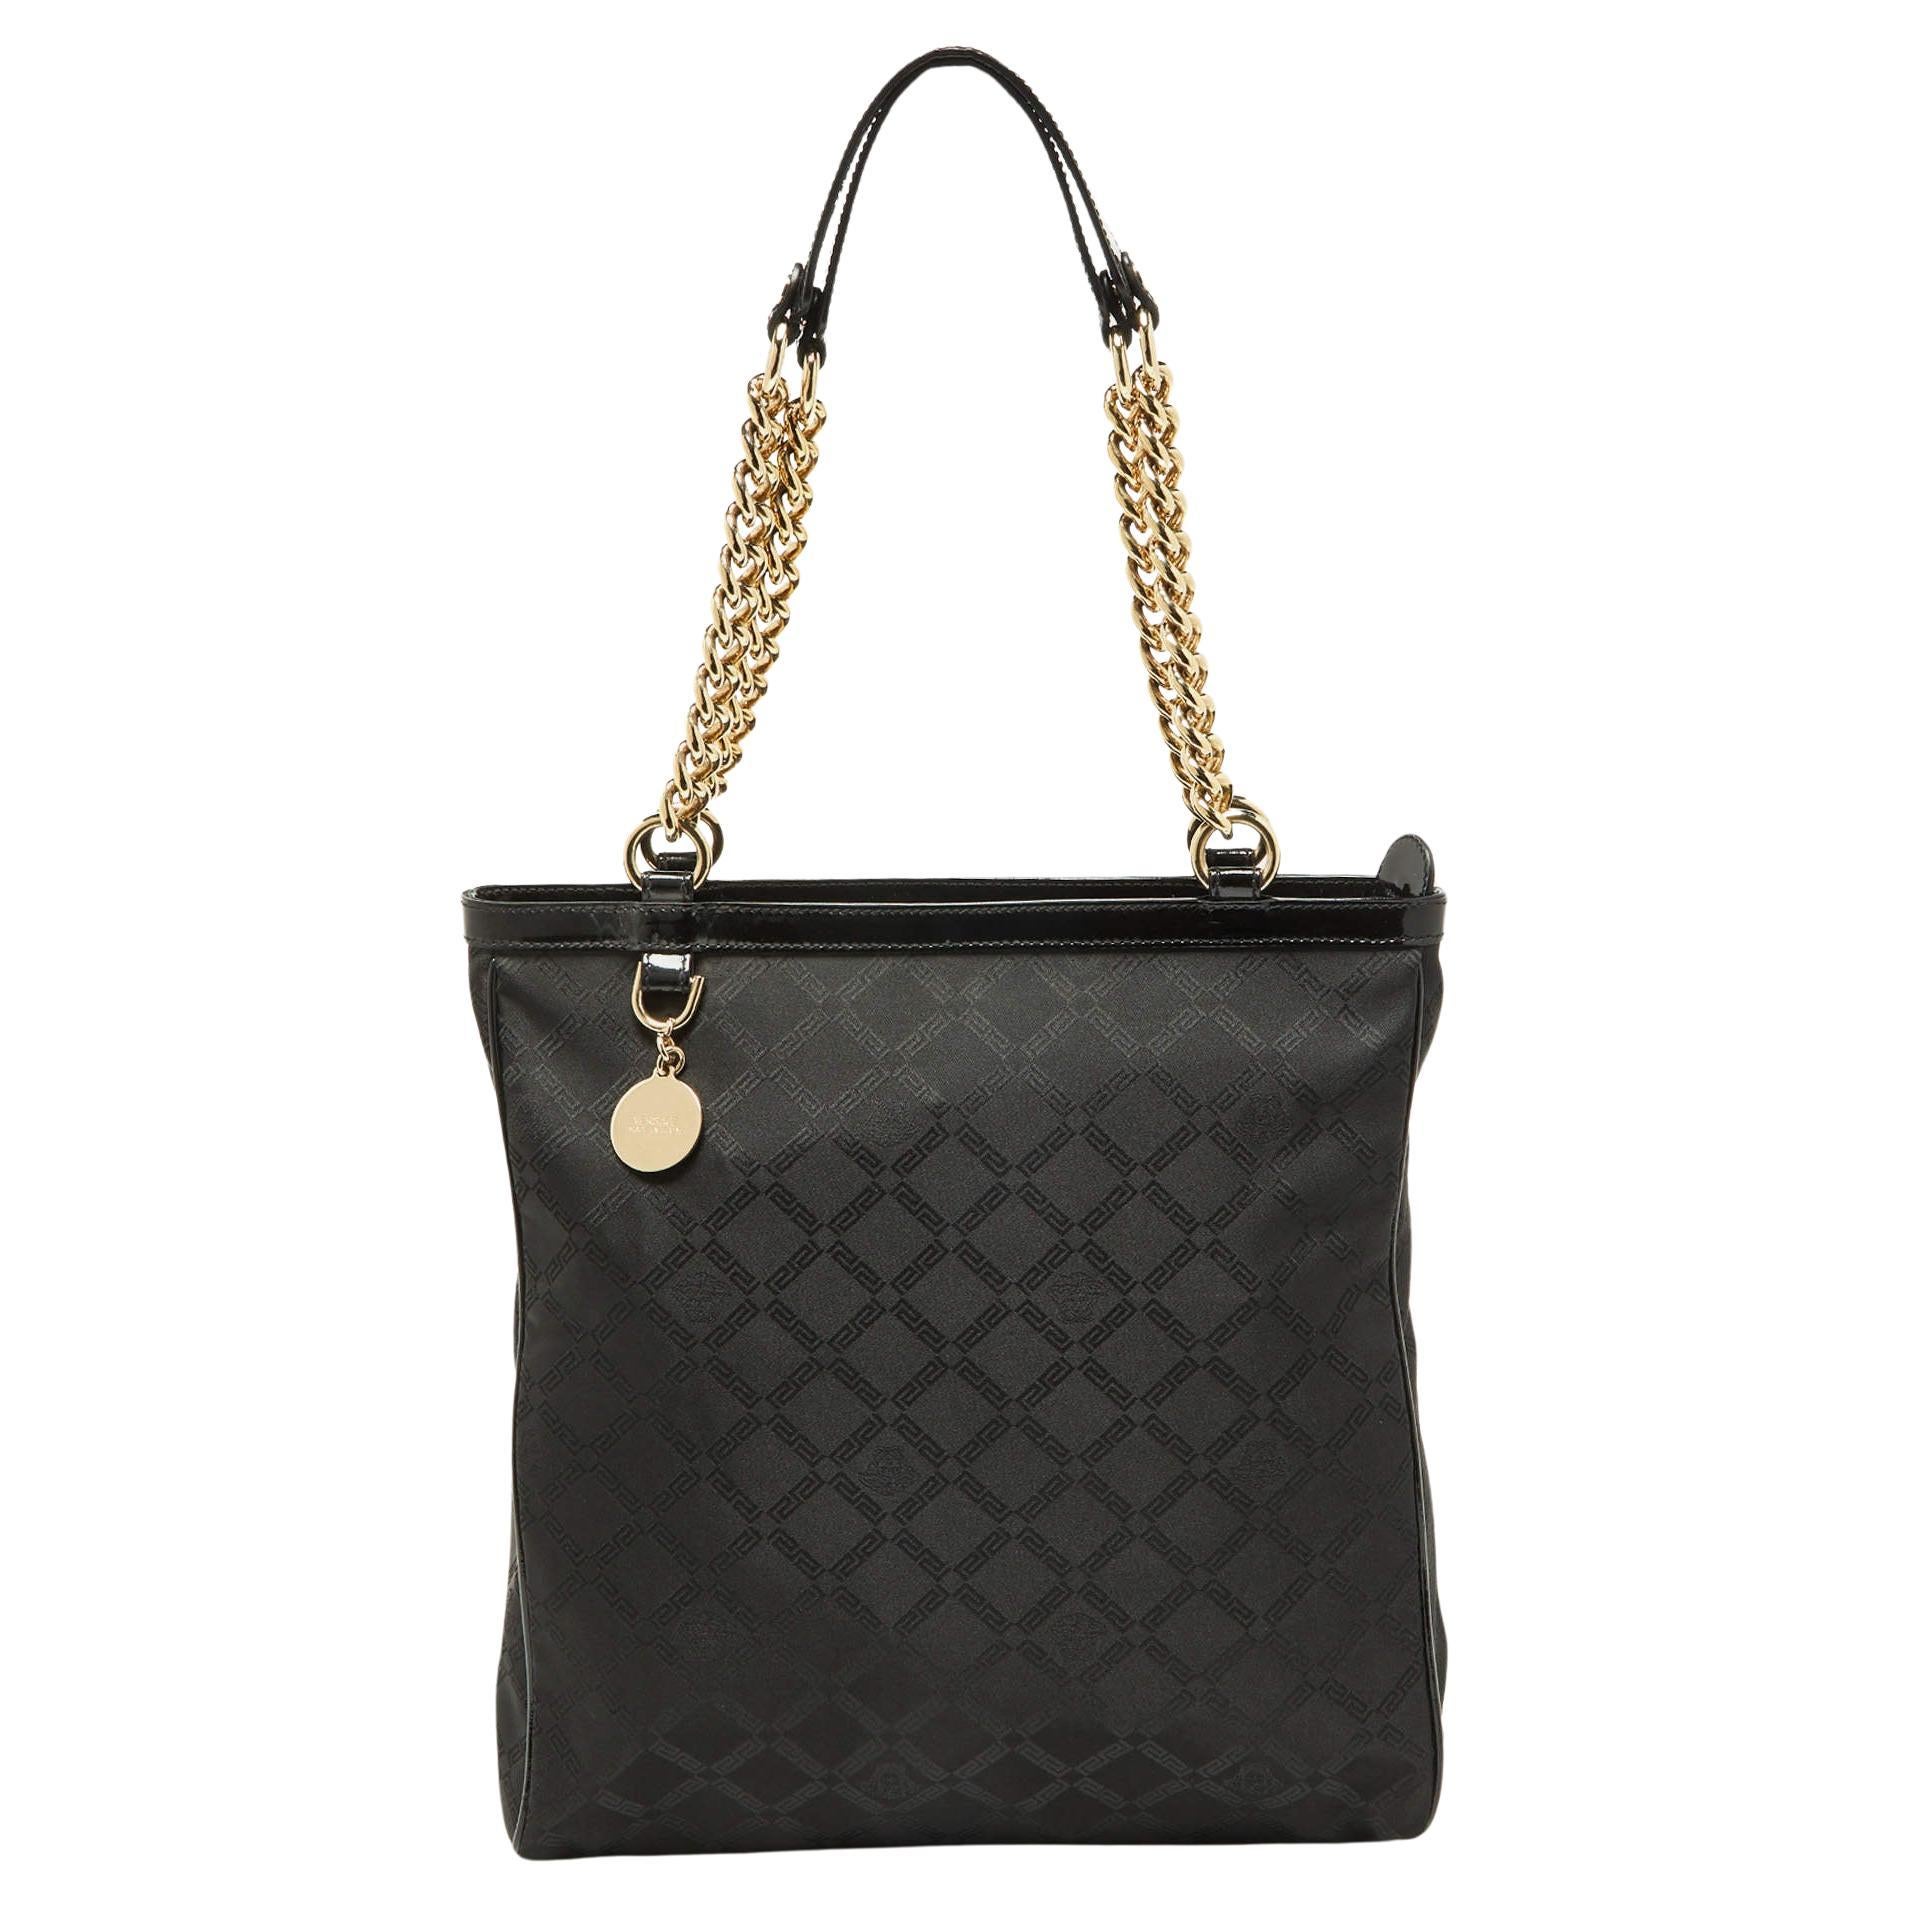 Versace Black Signature Fabric and Patent Leather Shopper Chain Tote